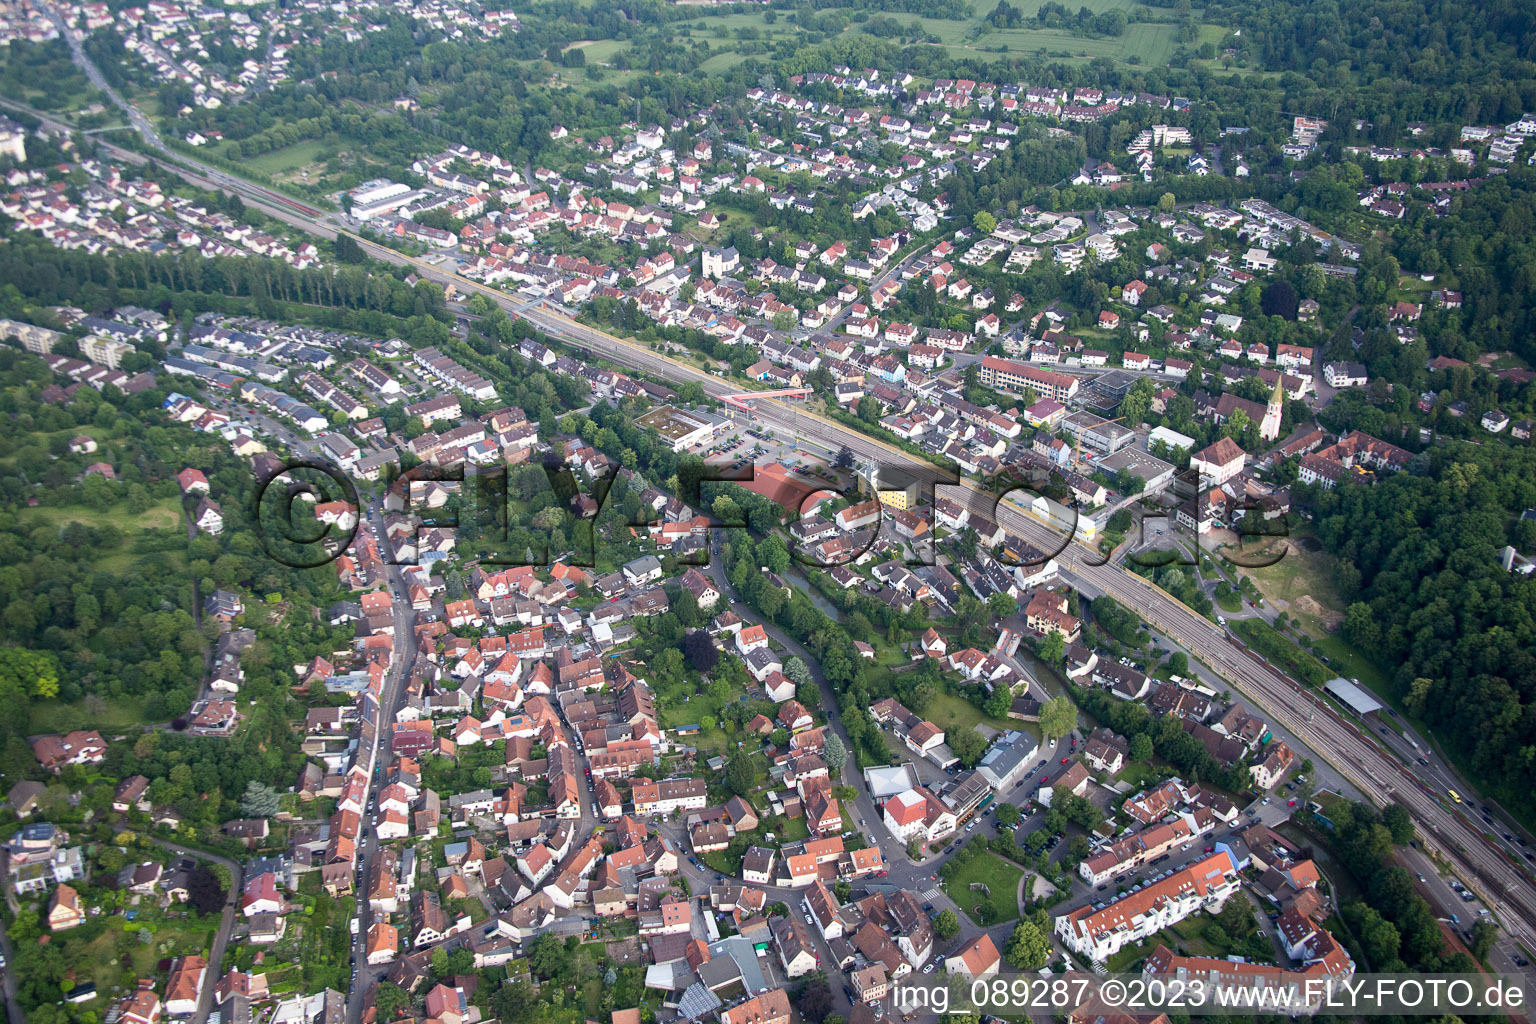 District Grötzingen in Karlsruhe in the state Baden-Wuerttemberg, Germany from the plane